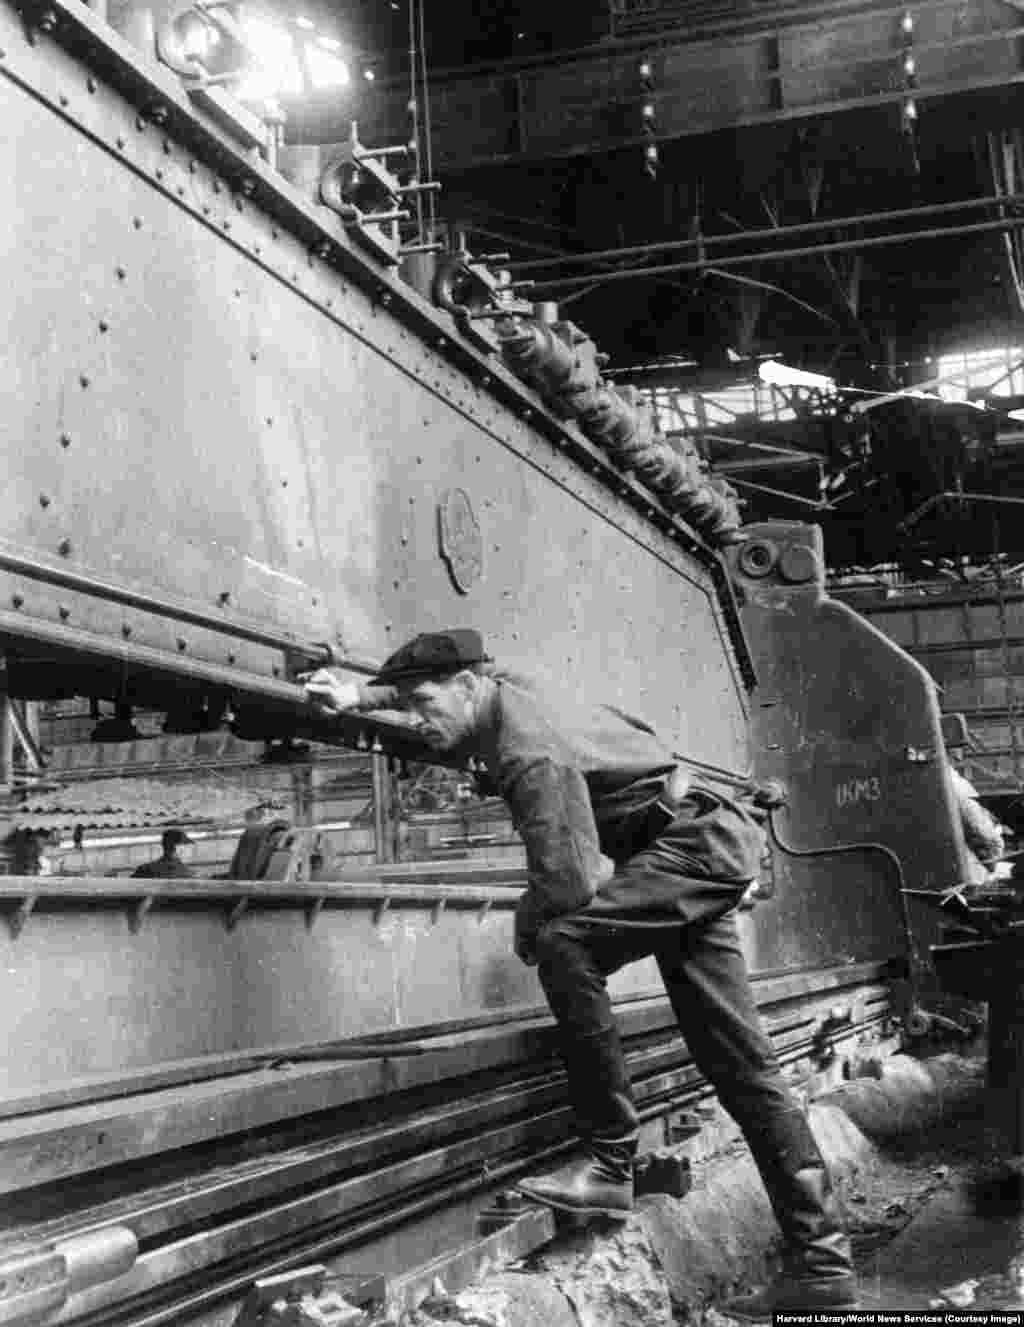 A mechanic checks on the assembly of heavy equipment during restoration work at the Stalin Machine Building Plant in Kramatorsk in the late 1940s. According to a declassified CIA report&nbsp;from 1952, the factory was &quot;80 percent damaged during the war&quot; and resumed full operation in May 1949.